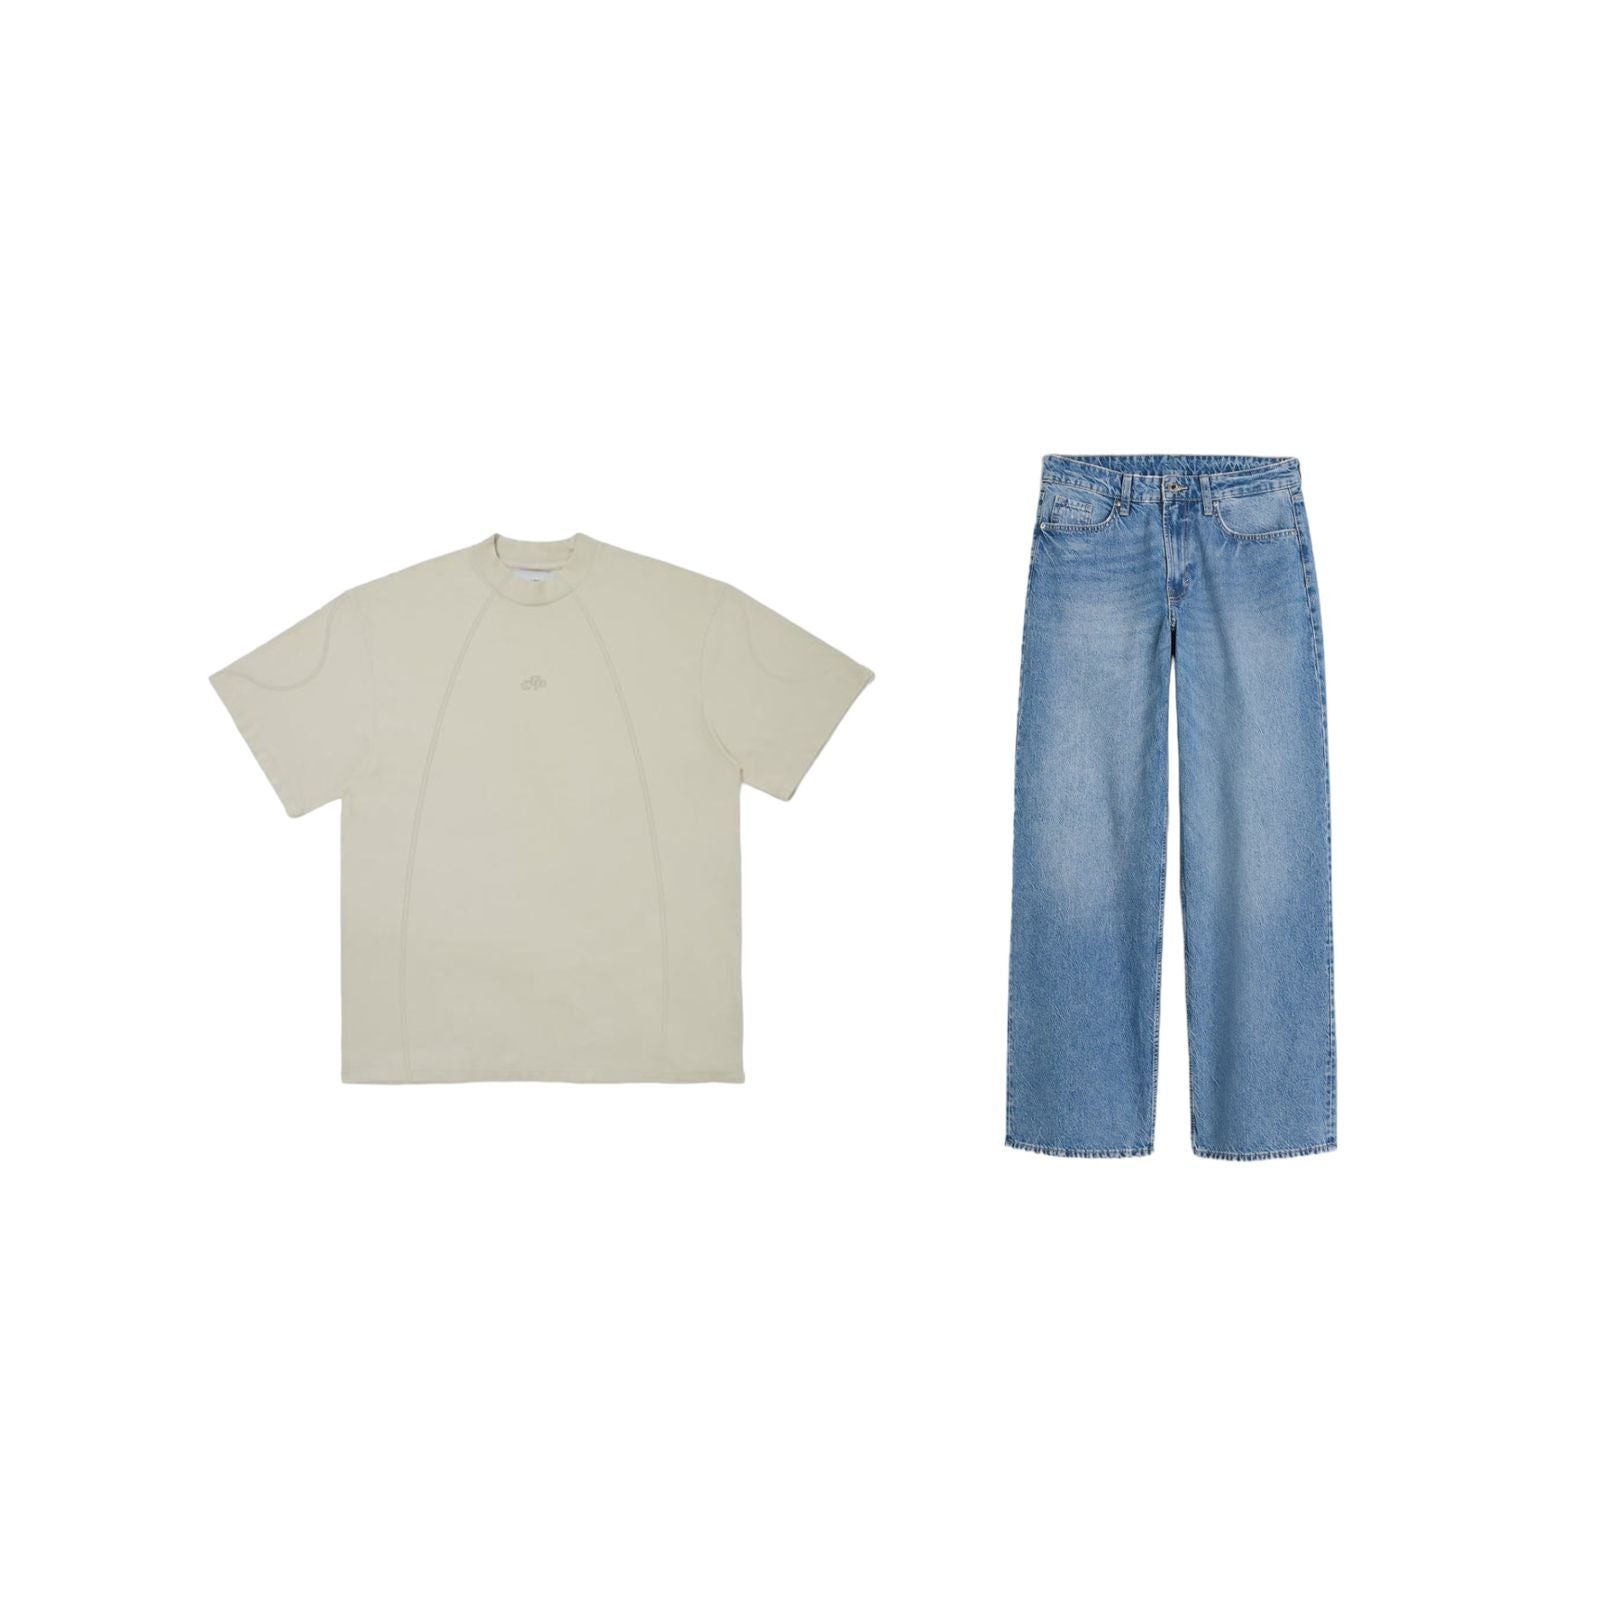 Interconected T-SHIRT + Baggy CTP Jeans